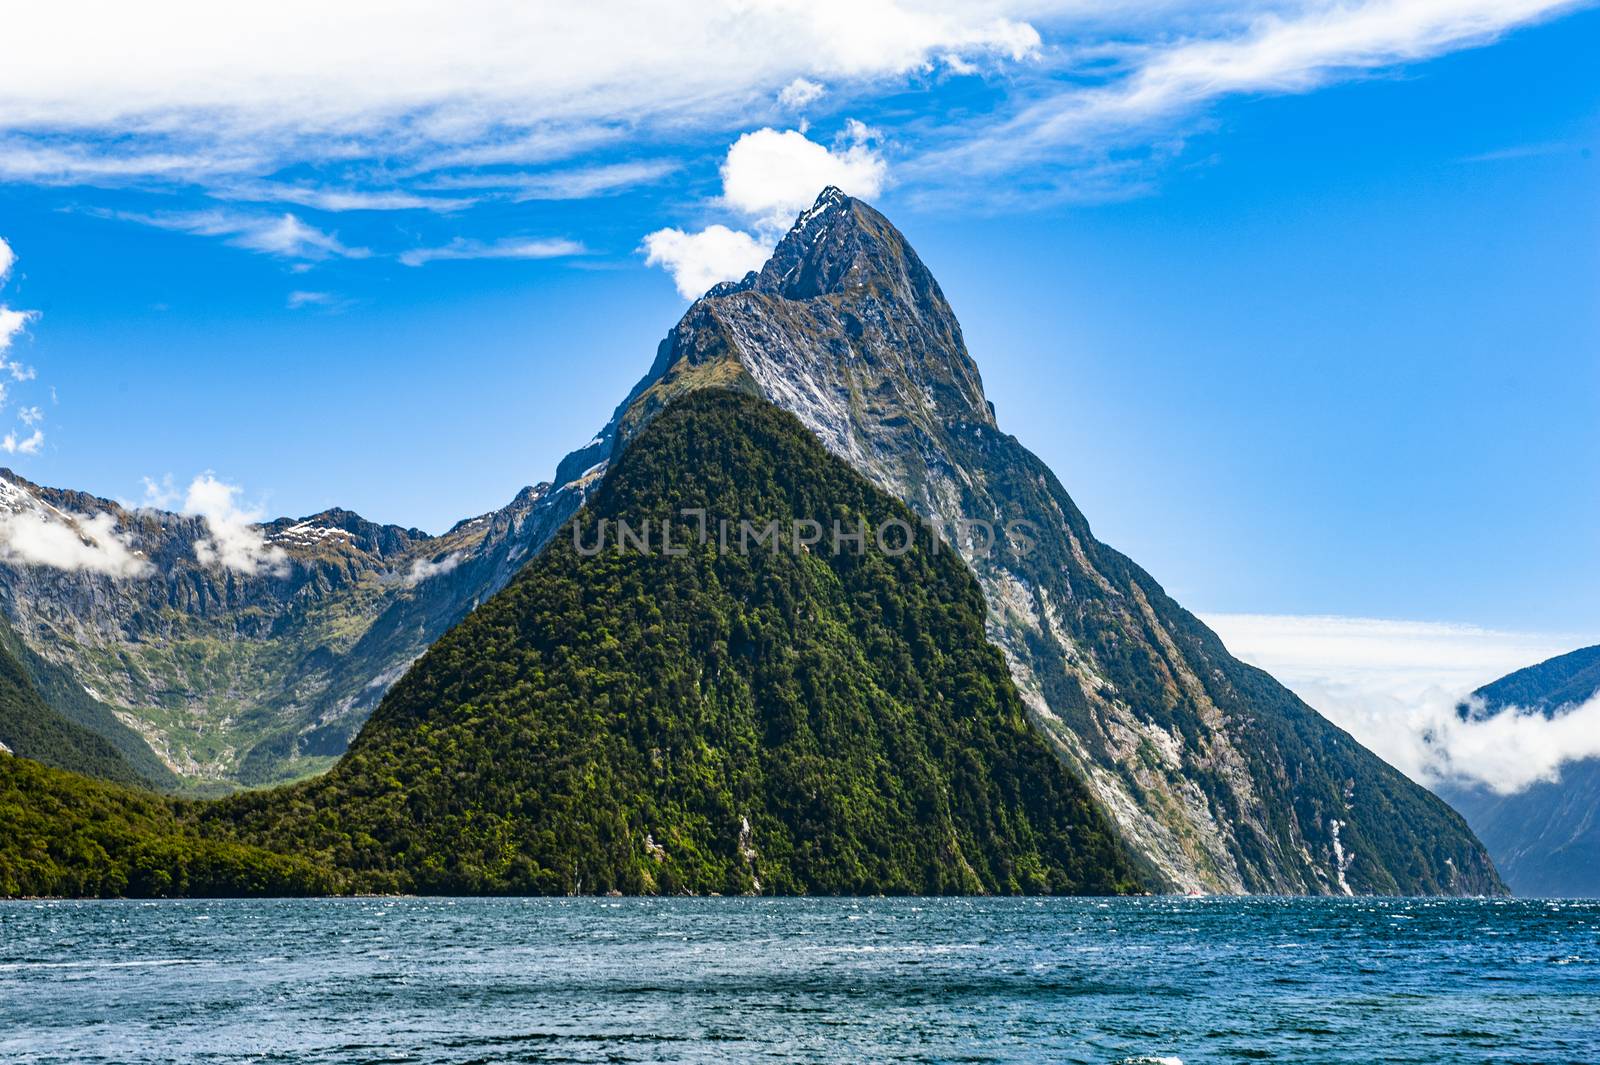 Famous Mitre Peak rising from the Milford Sound fiord. Fiordland national park, New Zealand